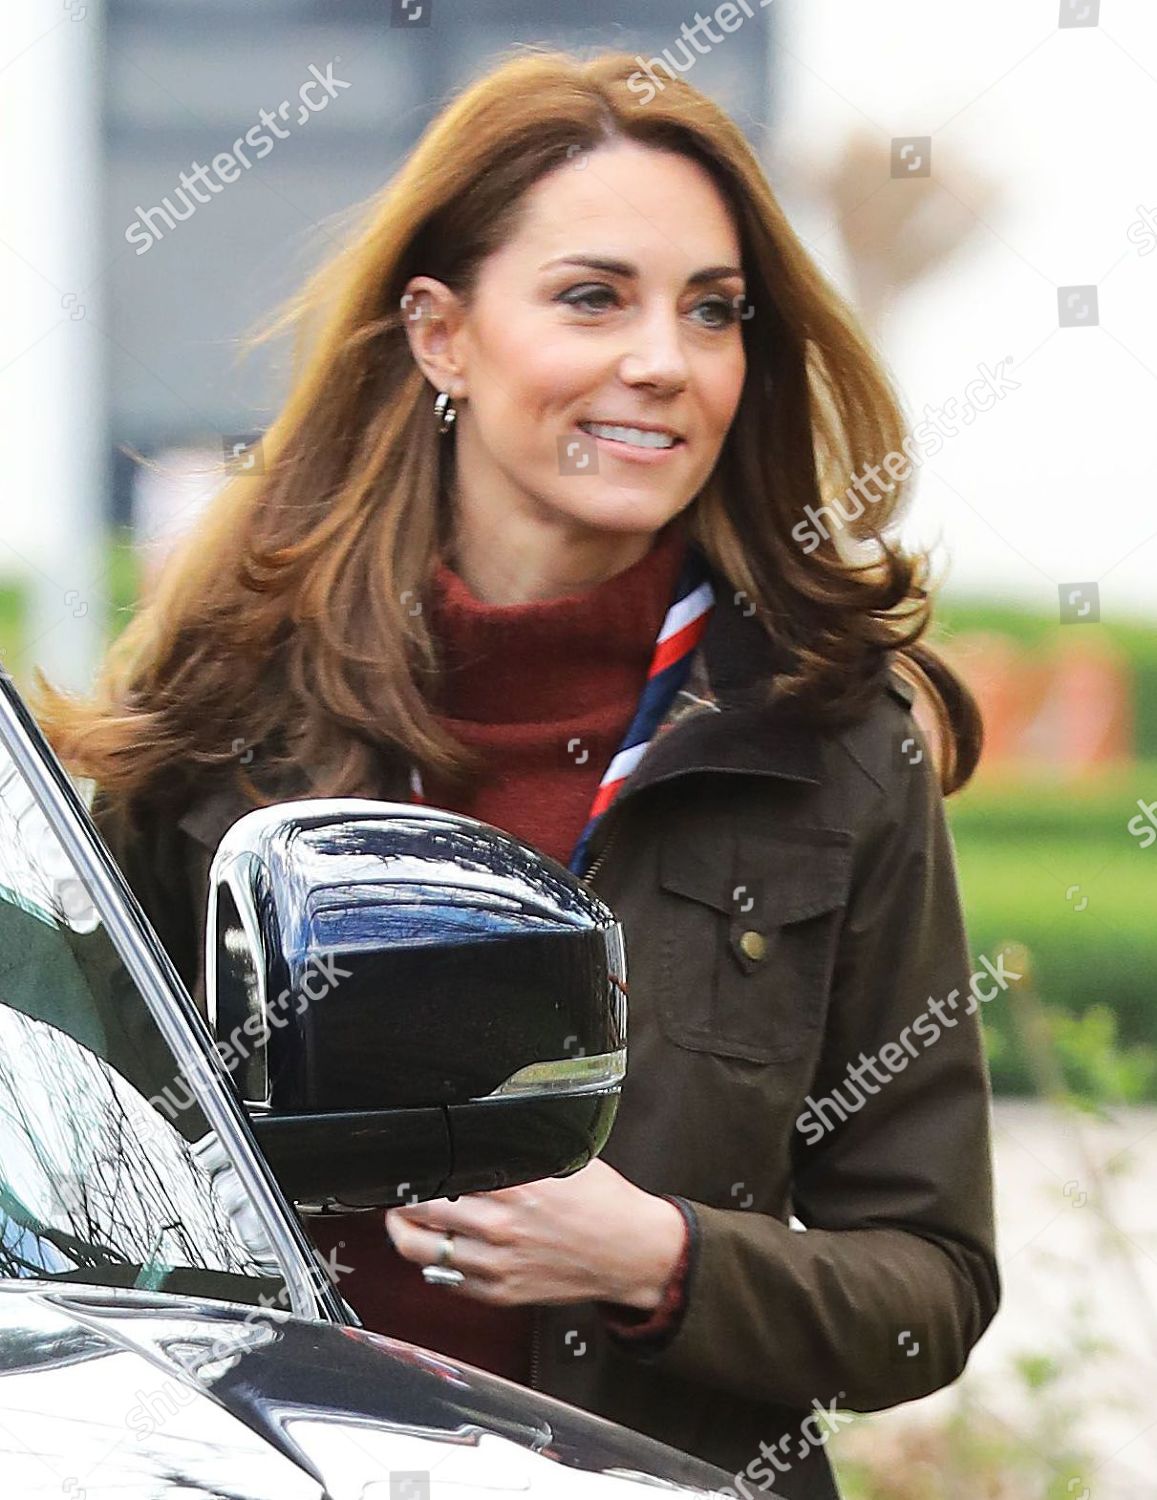 catherine-duchess-of-cambridge-visit-to-the-scouts-headquarters-gilwell-park-essex-uk-shutterstock-editorial-10180618a.jpg